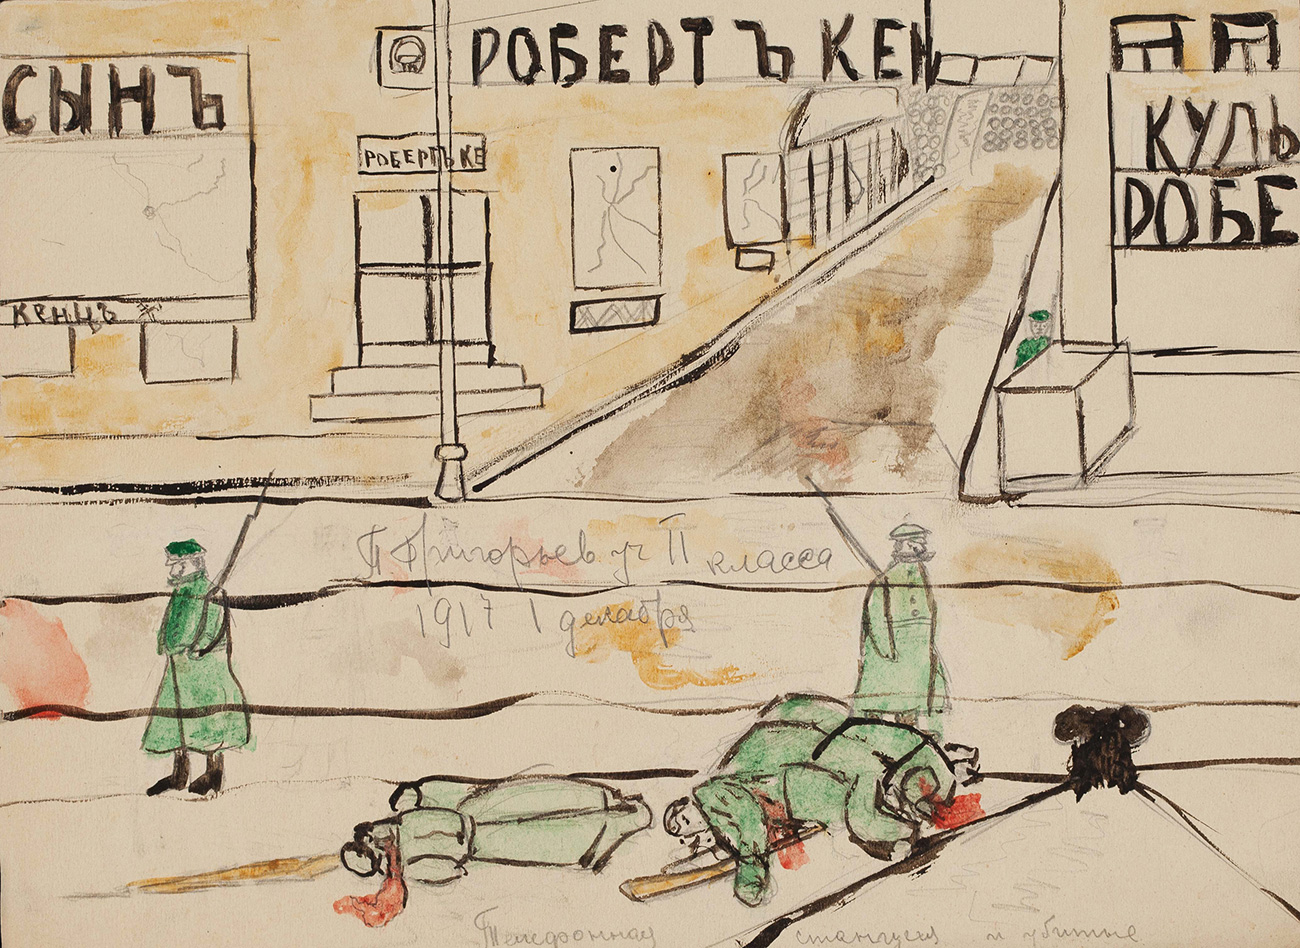 Today, to mark the centenary of the revolution, the museum has created an exhibition of this artwork entitled “The Great Russian Revolution Drawn by Children”, which runs till June 19. // “Telephone station and people killed”, Moscow, December 1917